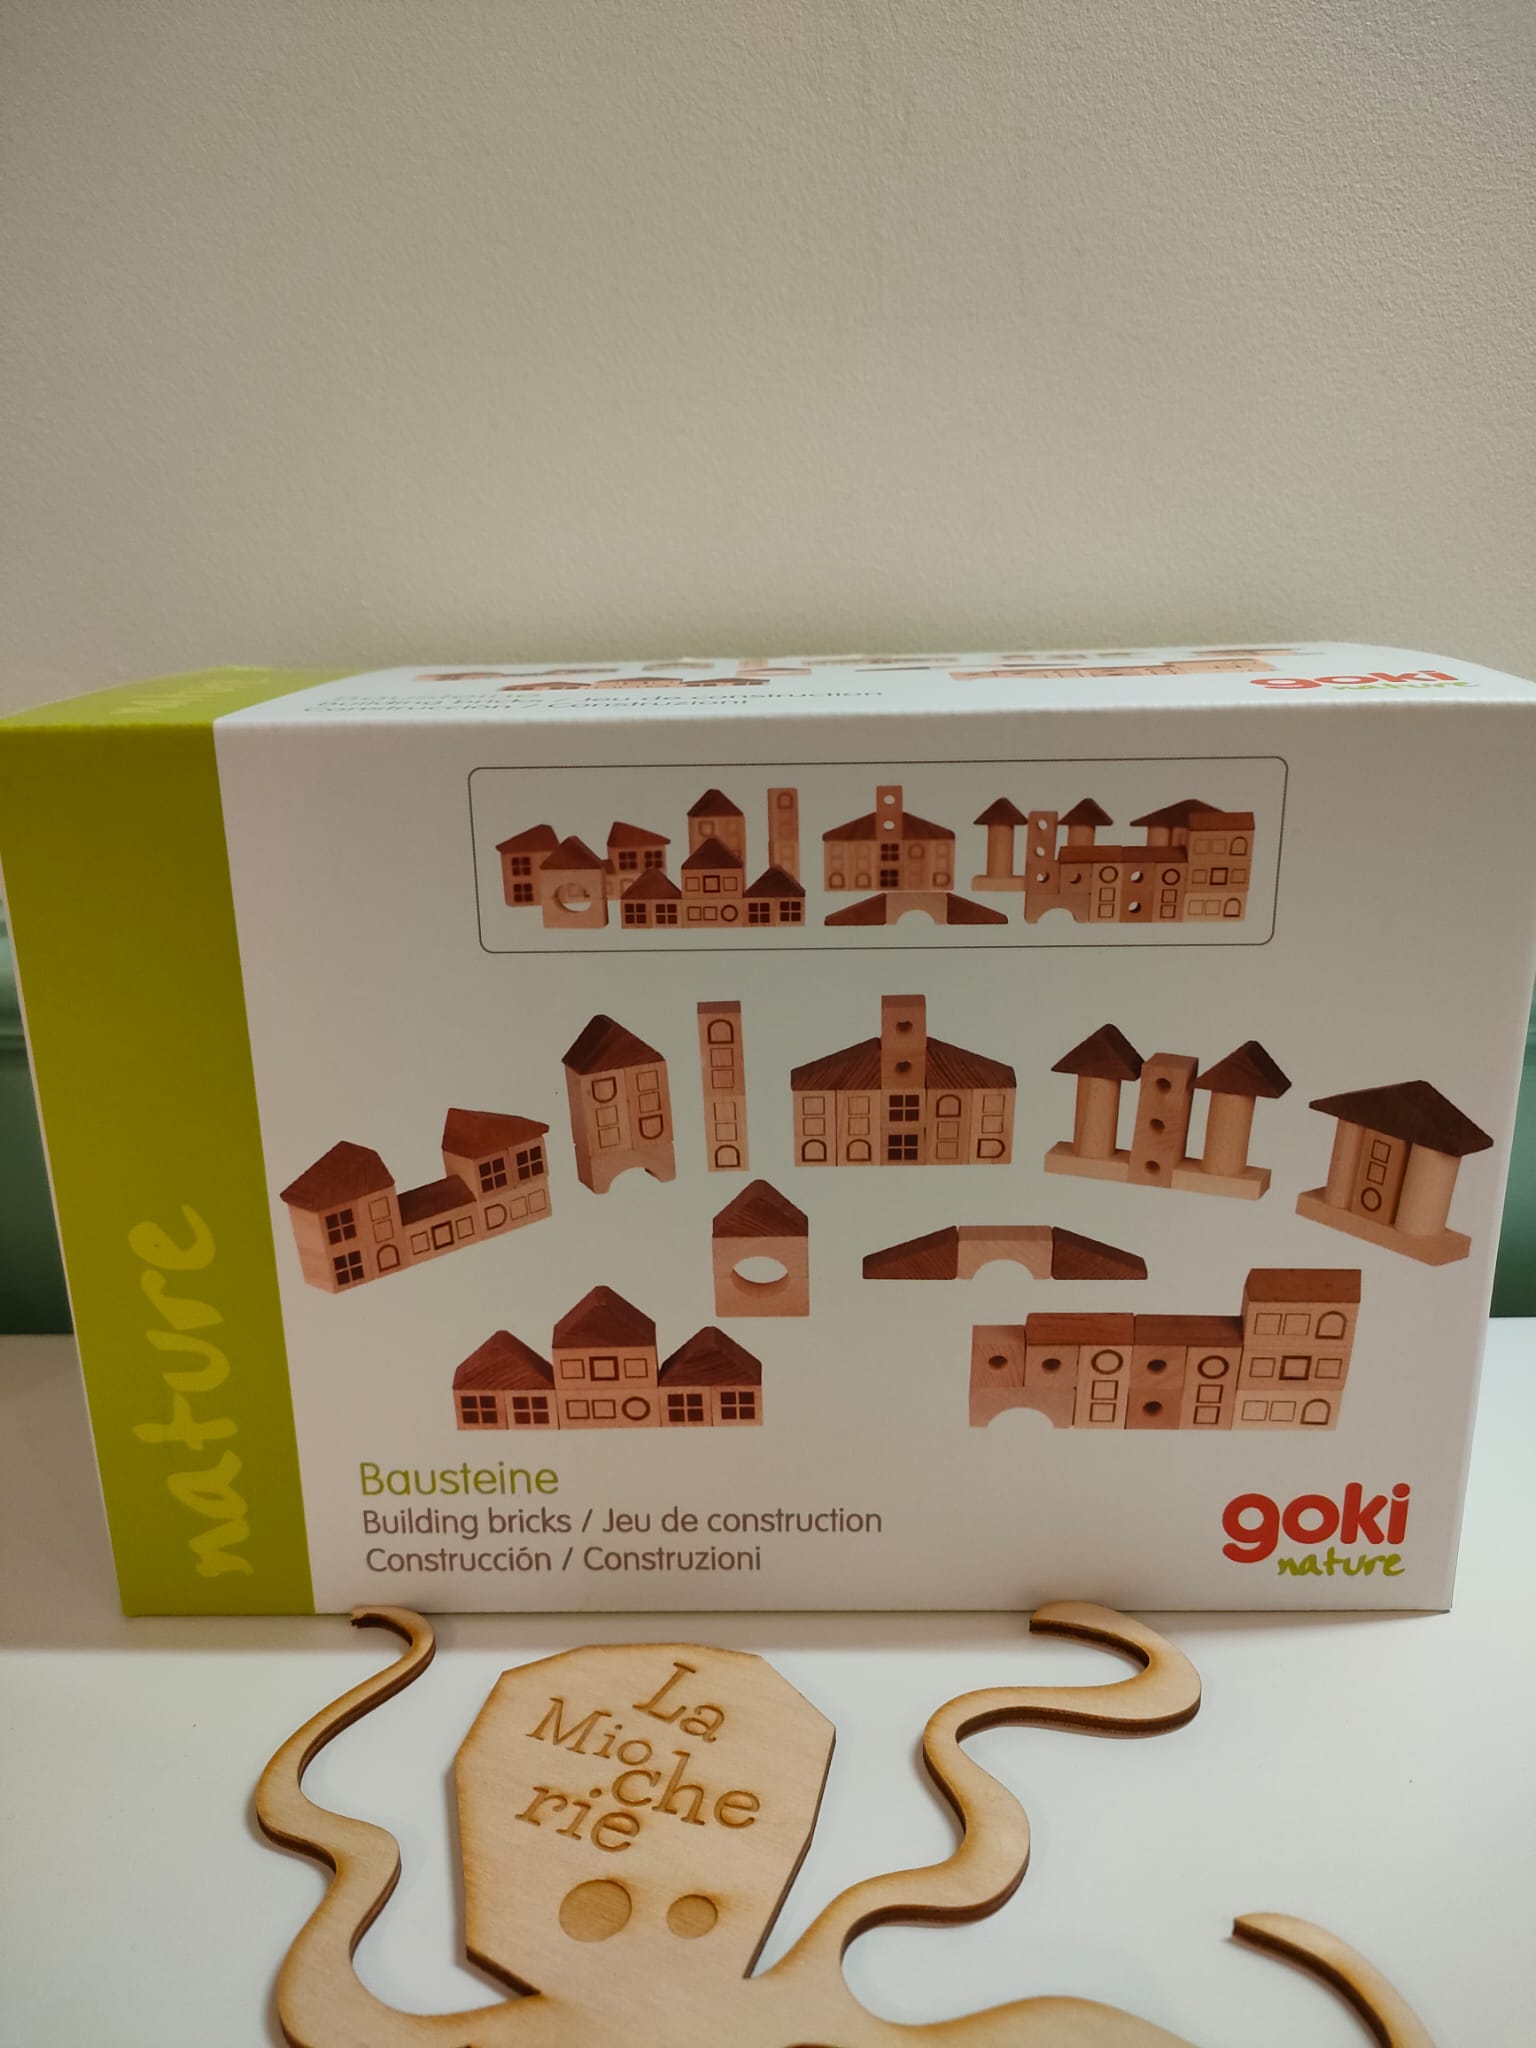 My Town construction game - Solid wood - Goki